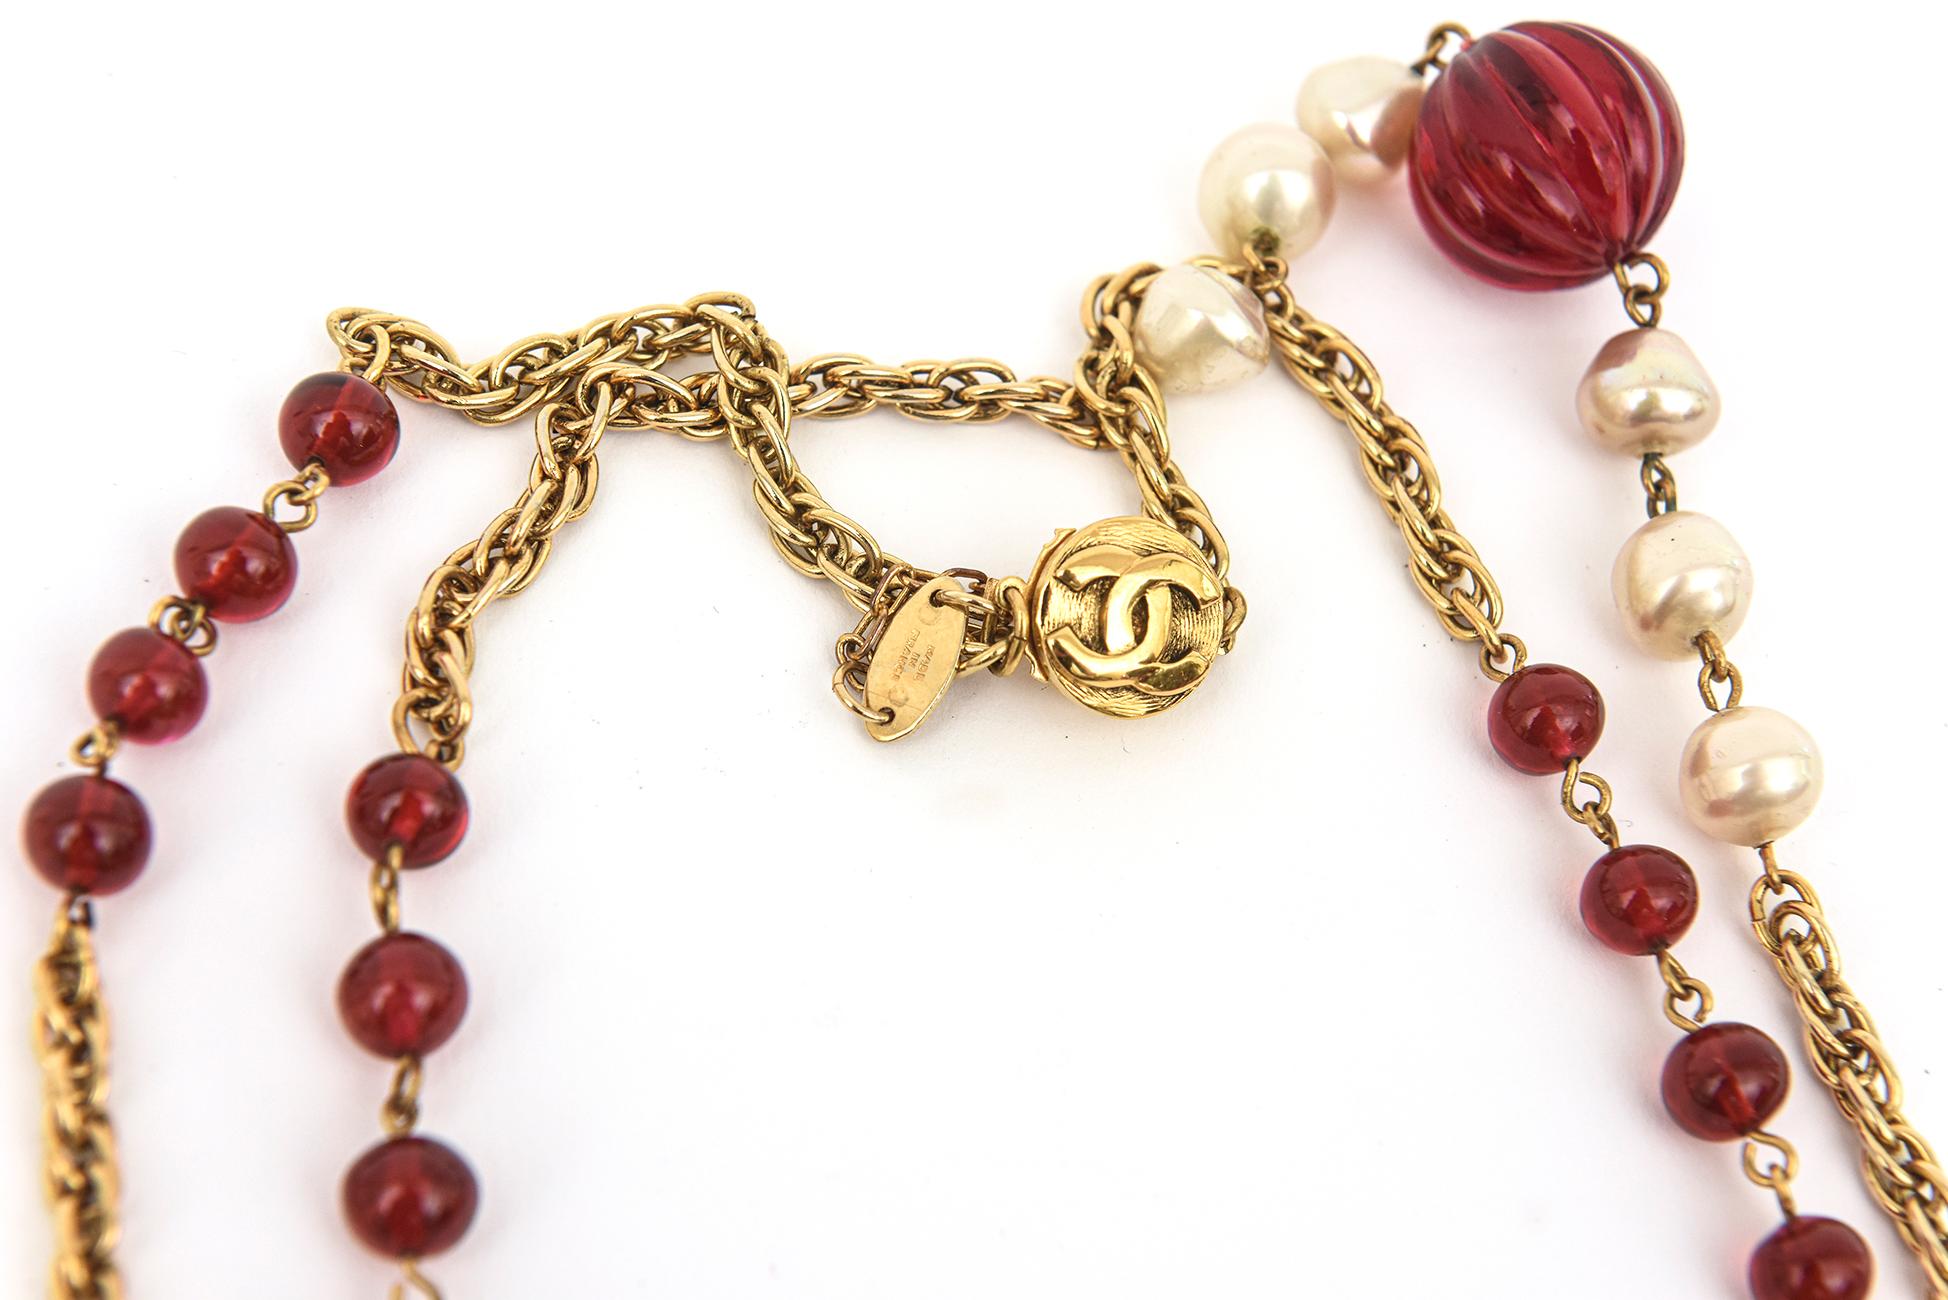 Chanel Long Sautoir Necklace with Red Gripoix Glass, Faux Pearls And Gold LInks In Good Condition For Sale In North Miami, FL